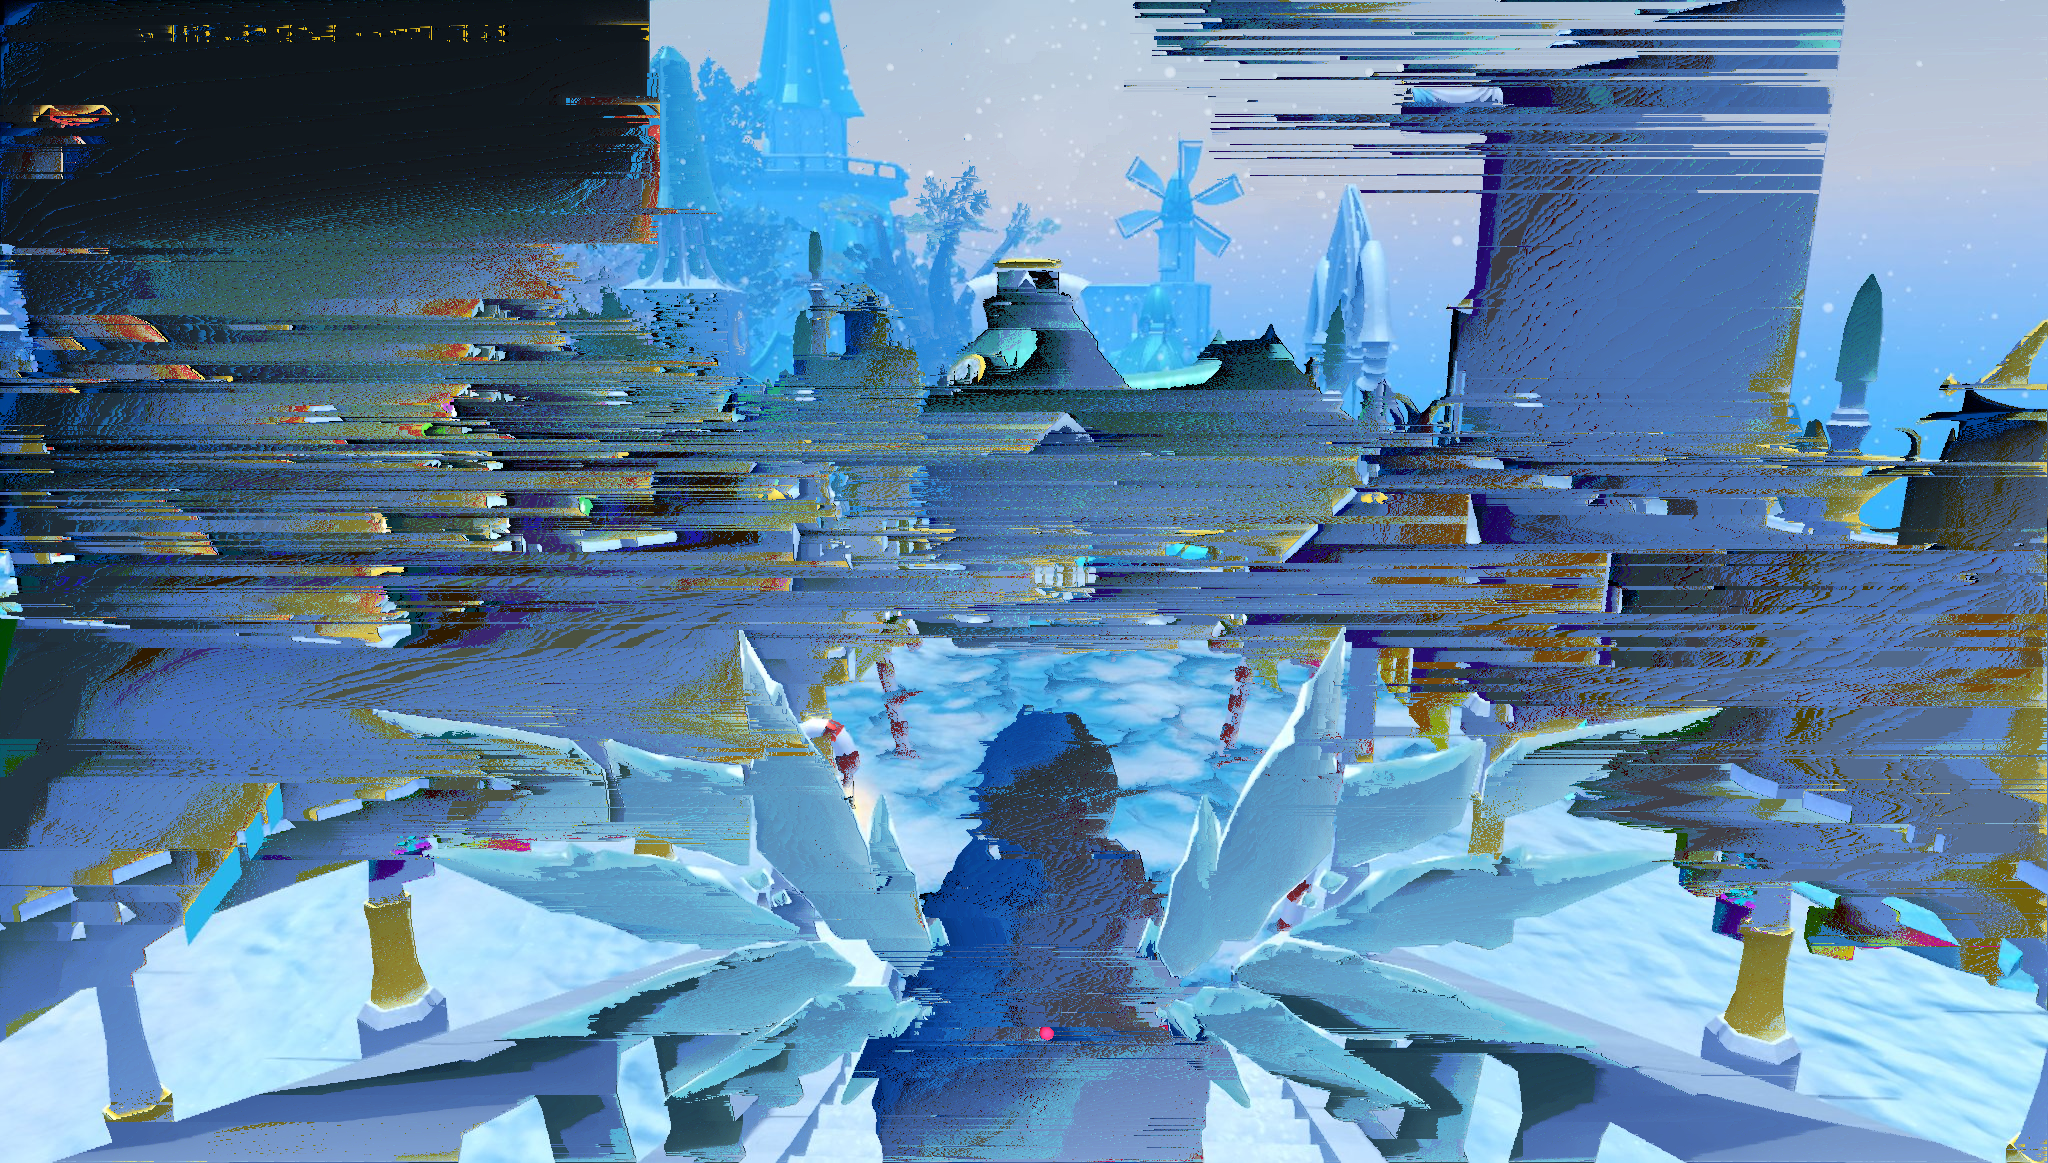 A character who has just unlocked their max cape looks out over a glitched blue landscape. She looks away from the camera and is framed by giant icy wings coming from her back.